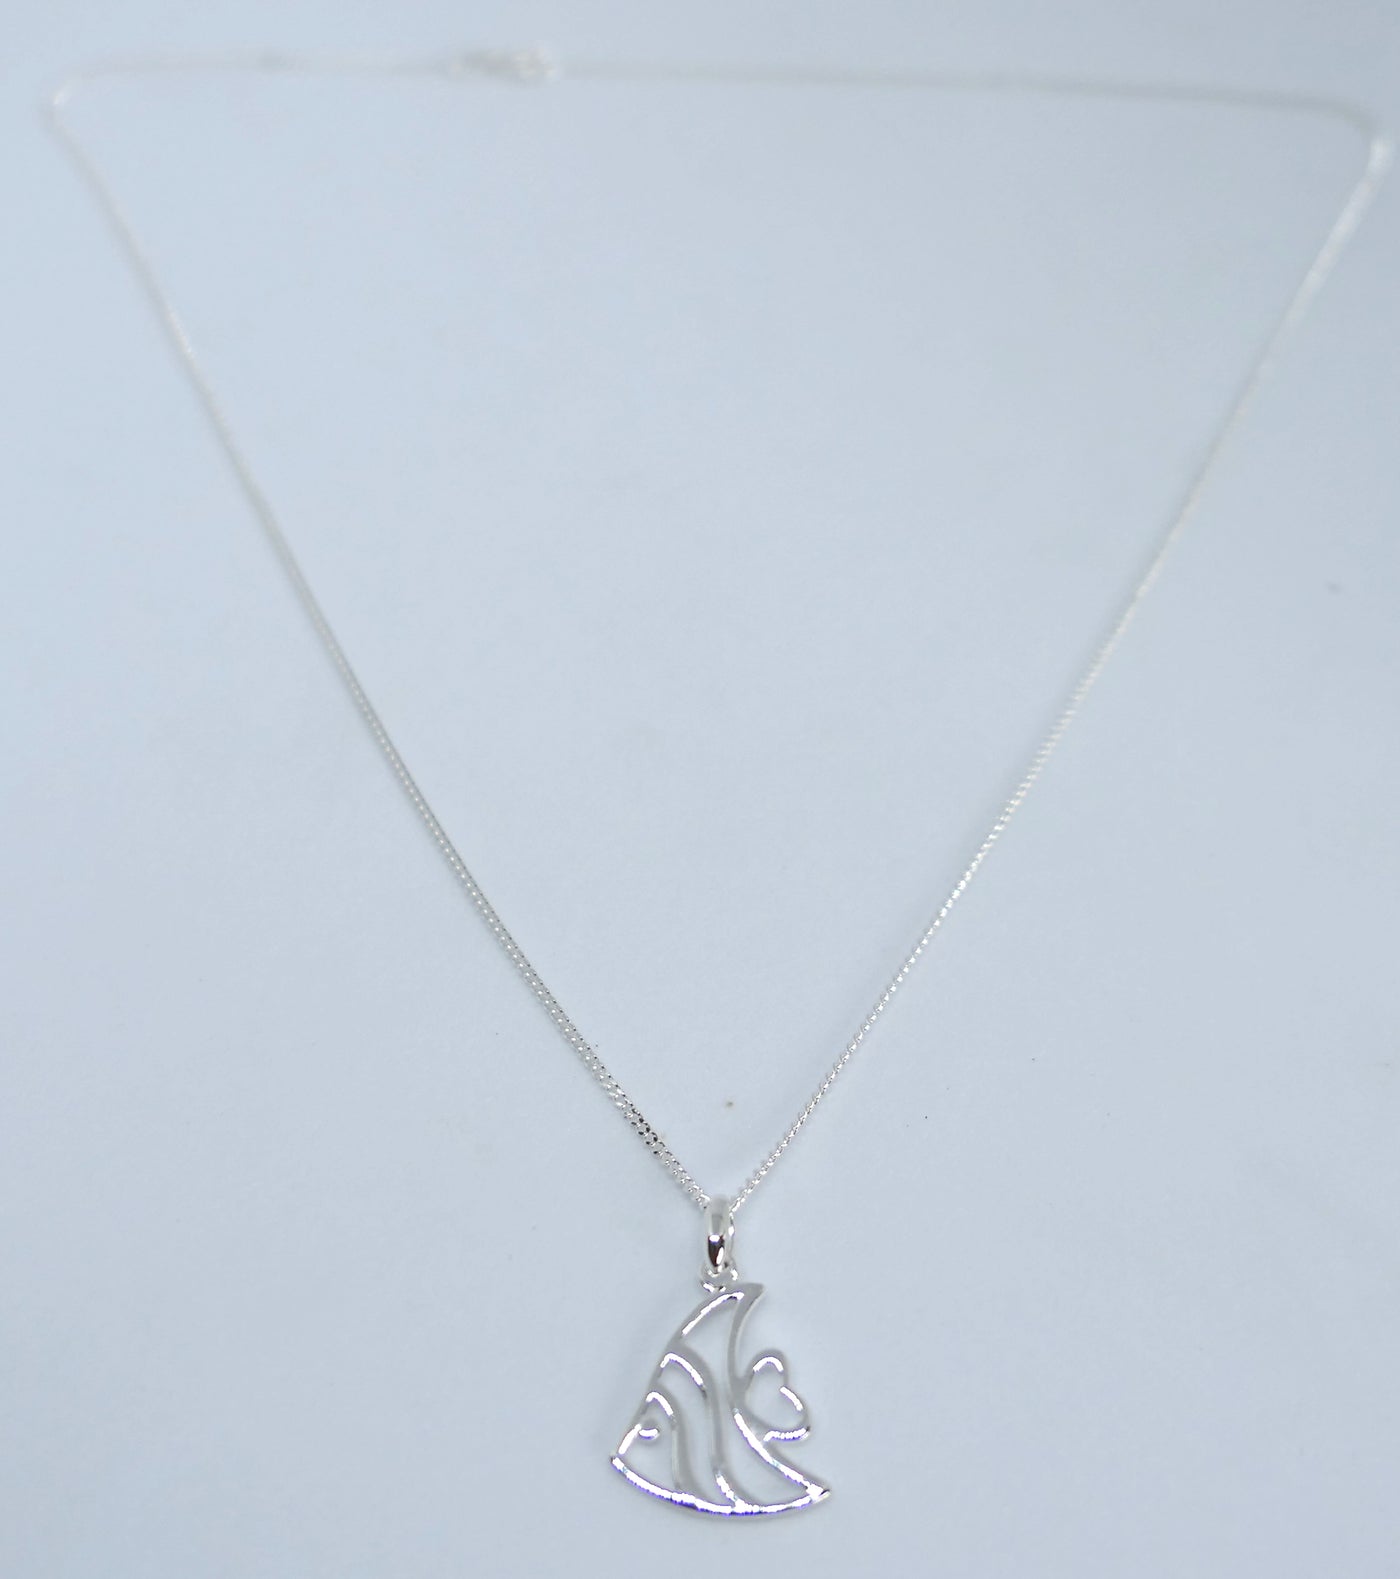 Silver Angel Fish Necklace